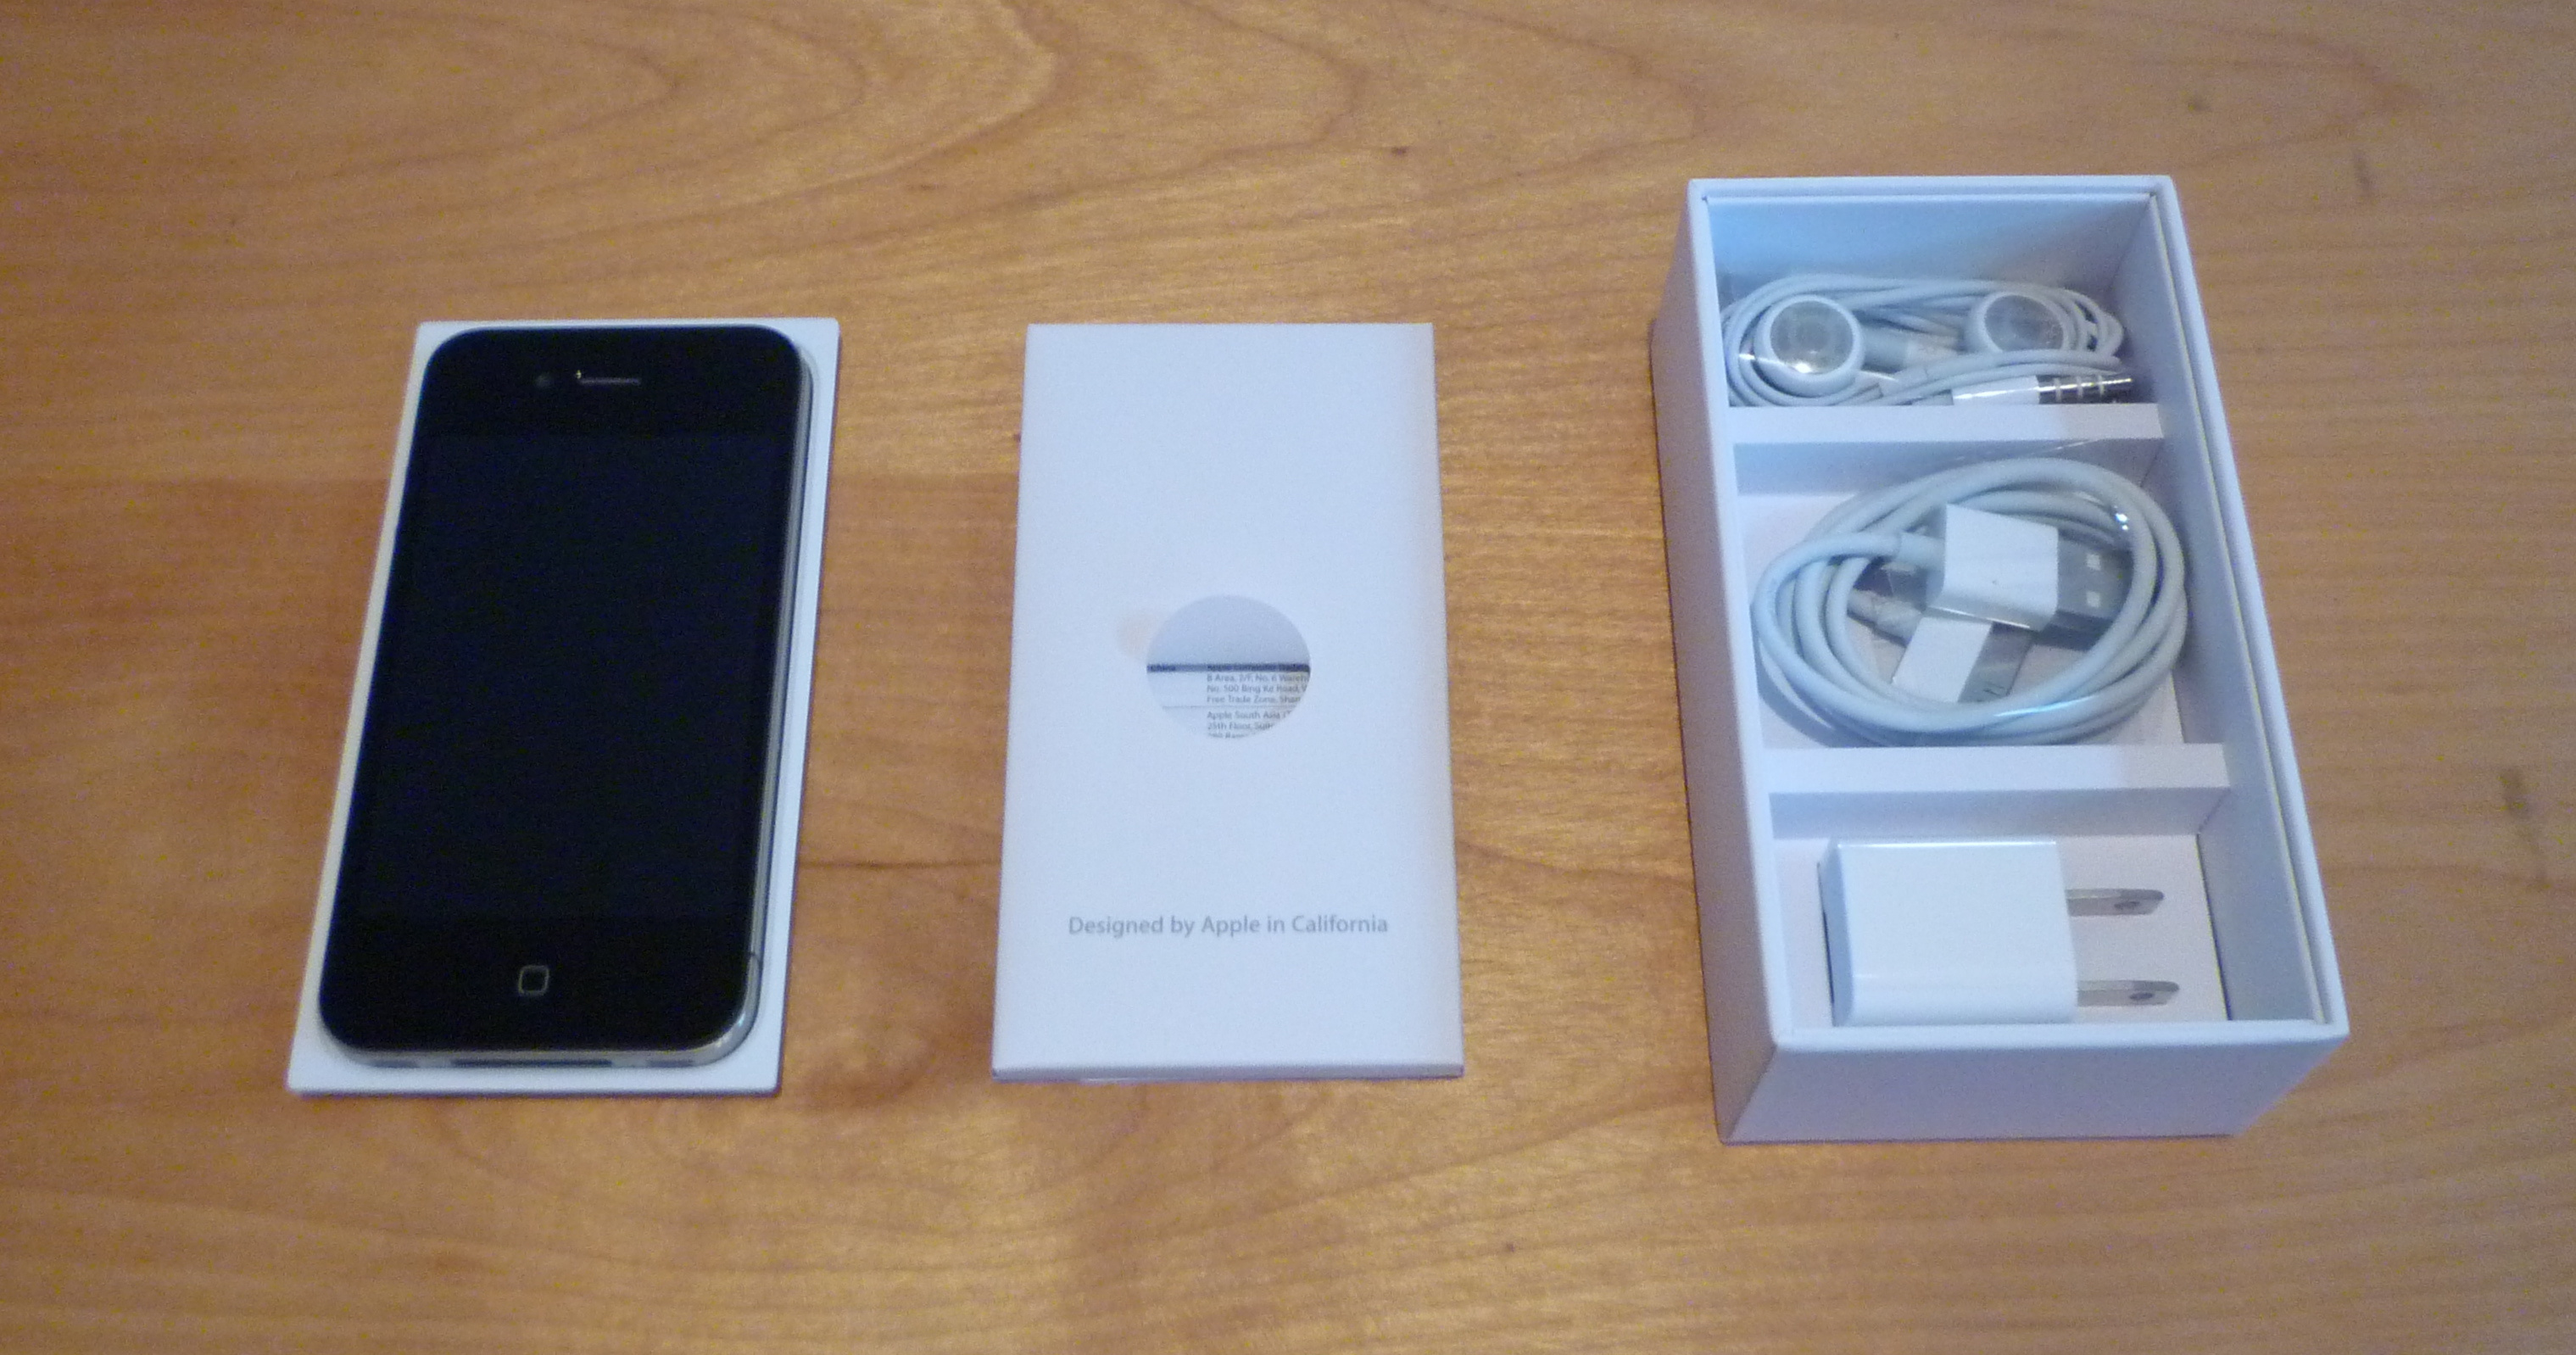 Apple iPhone 4 Black 16GB Brand new With everything large image 0